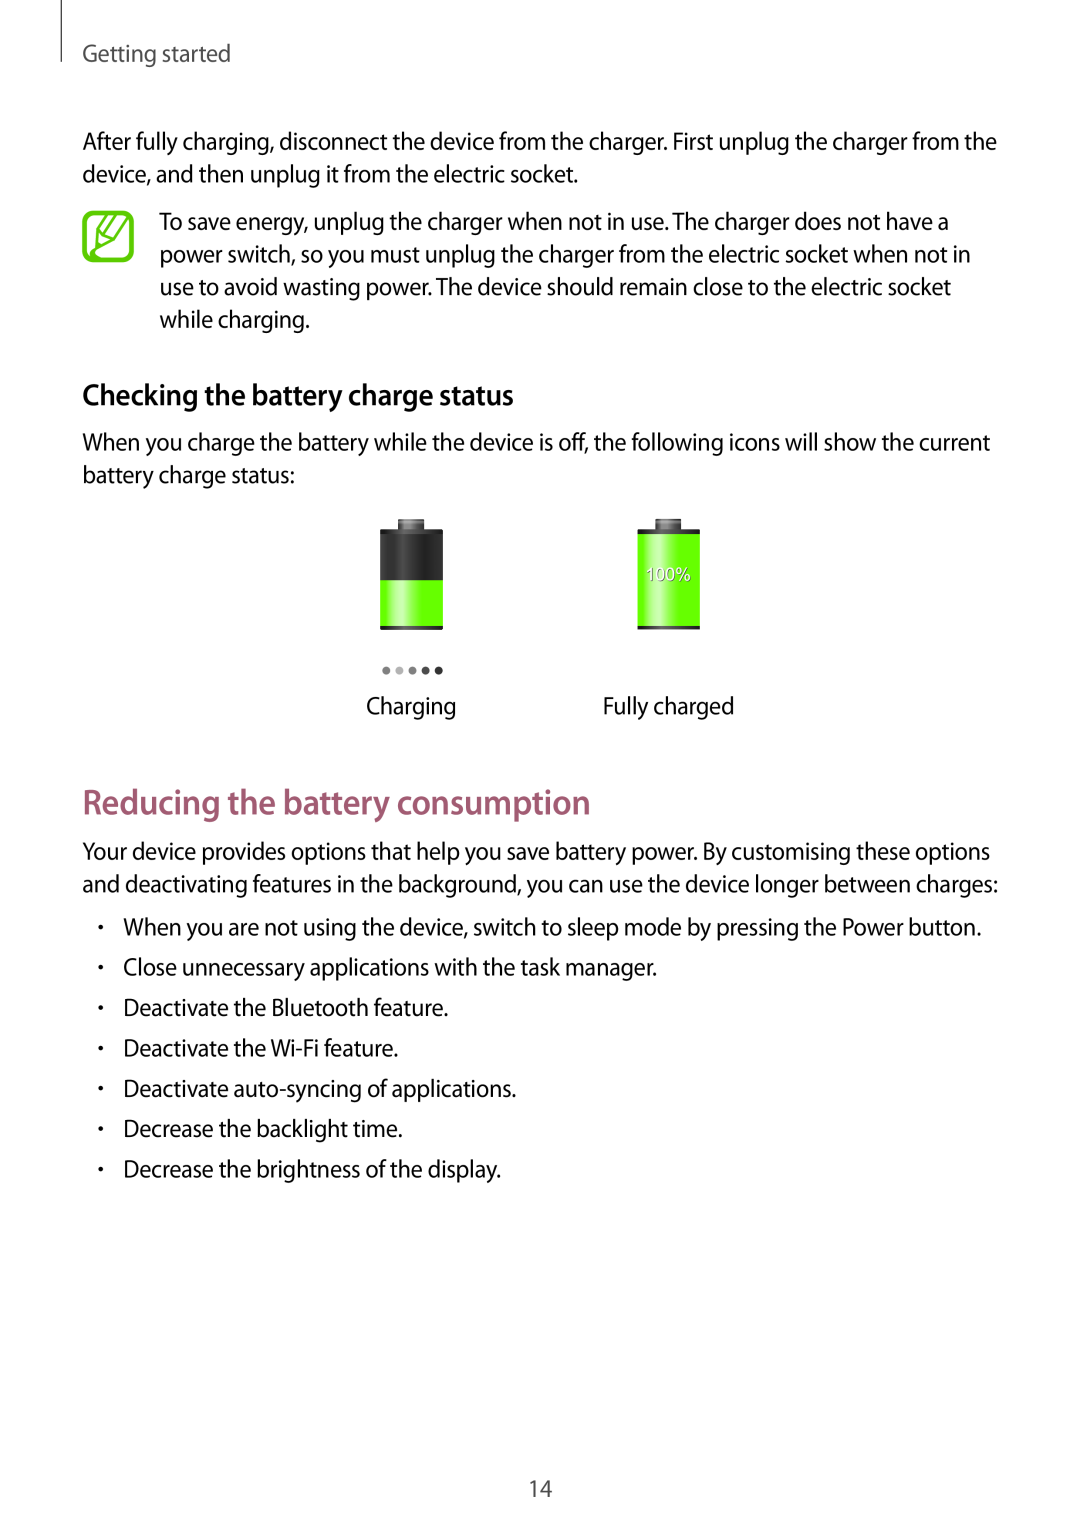 Samsung GT-N5100 user manual Reducing the battery consumption, Checking the battery charge status, Getting started 